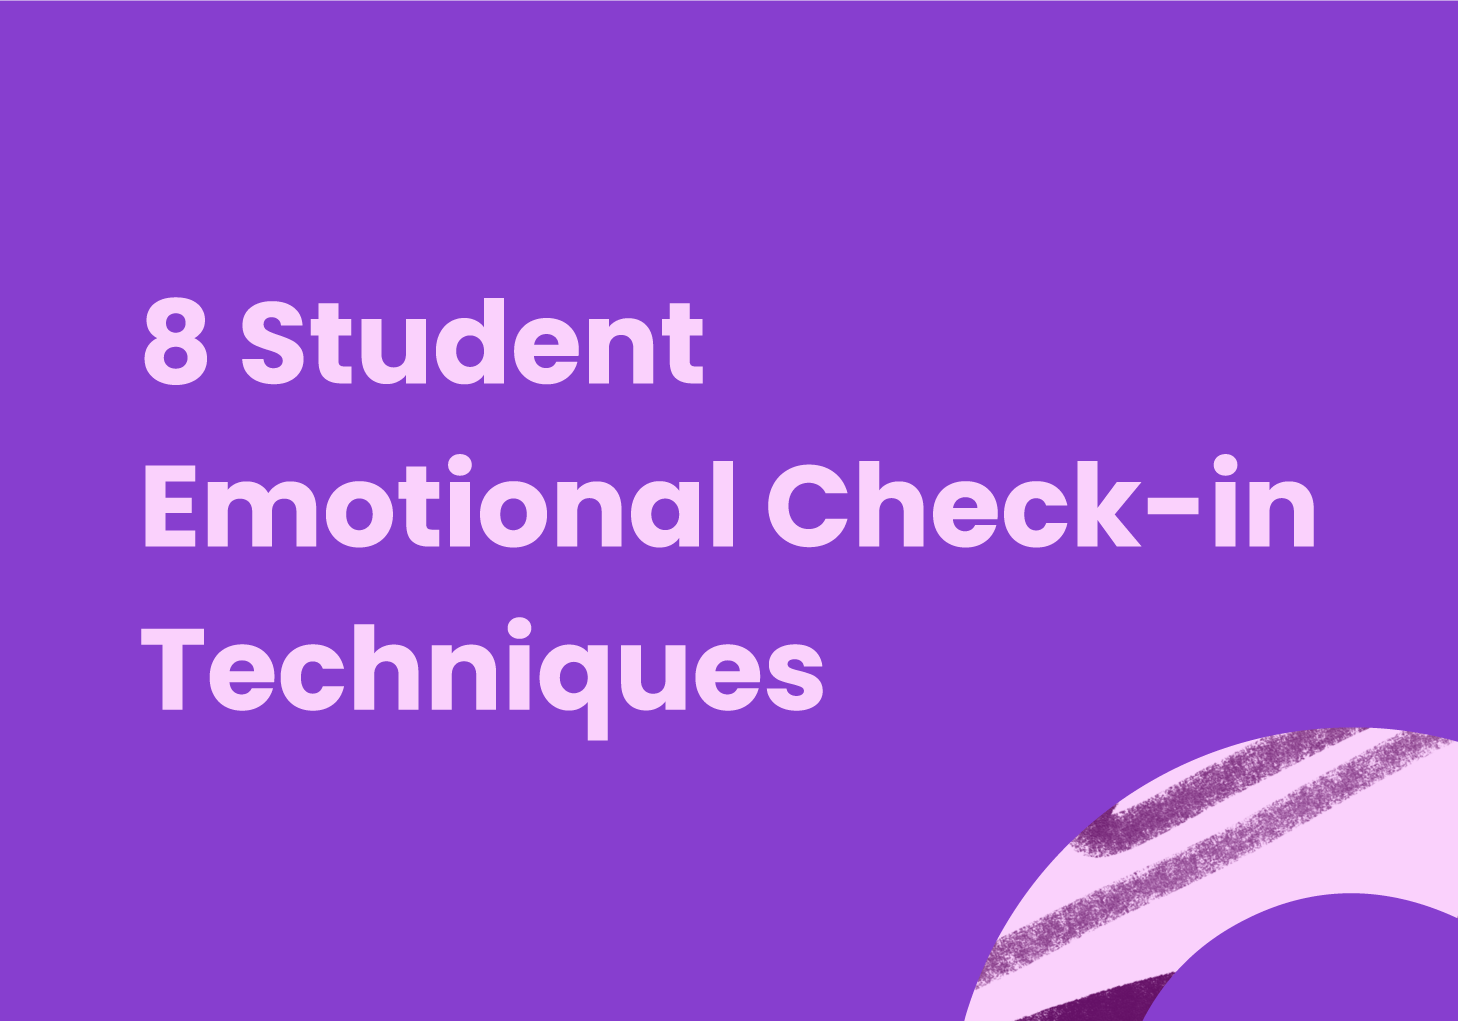 8 Student Emotional Check-in Techniques